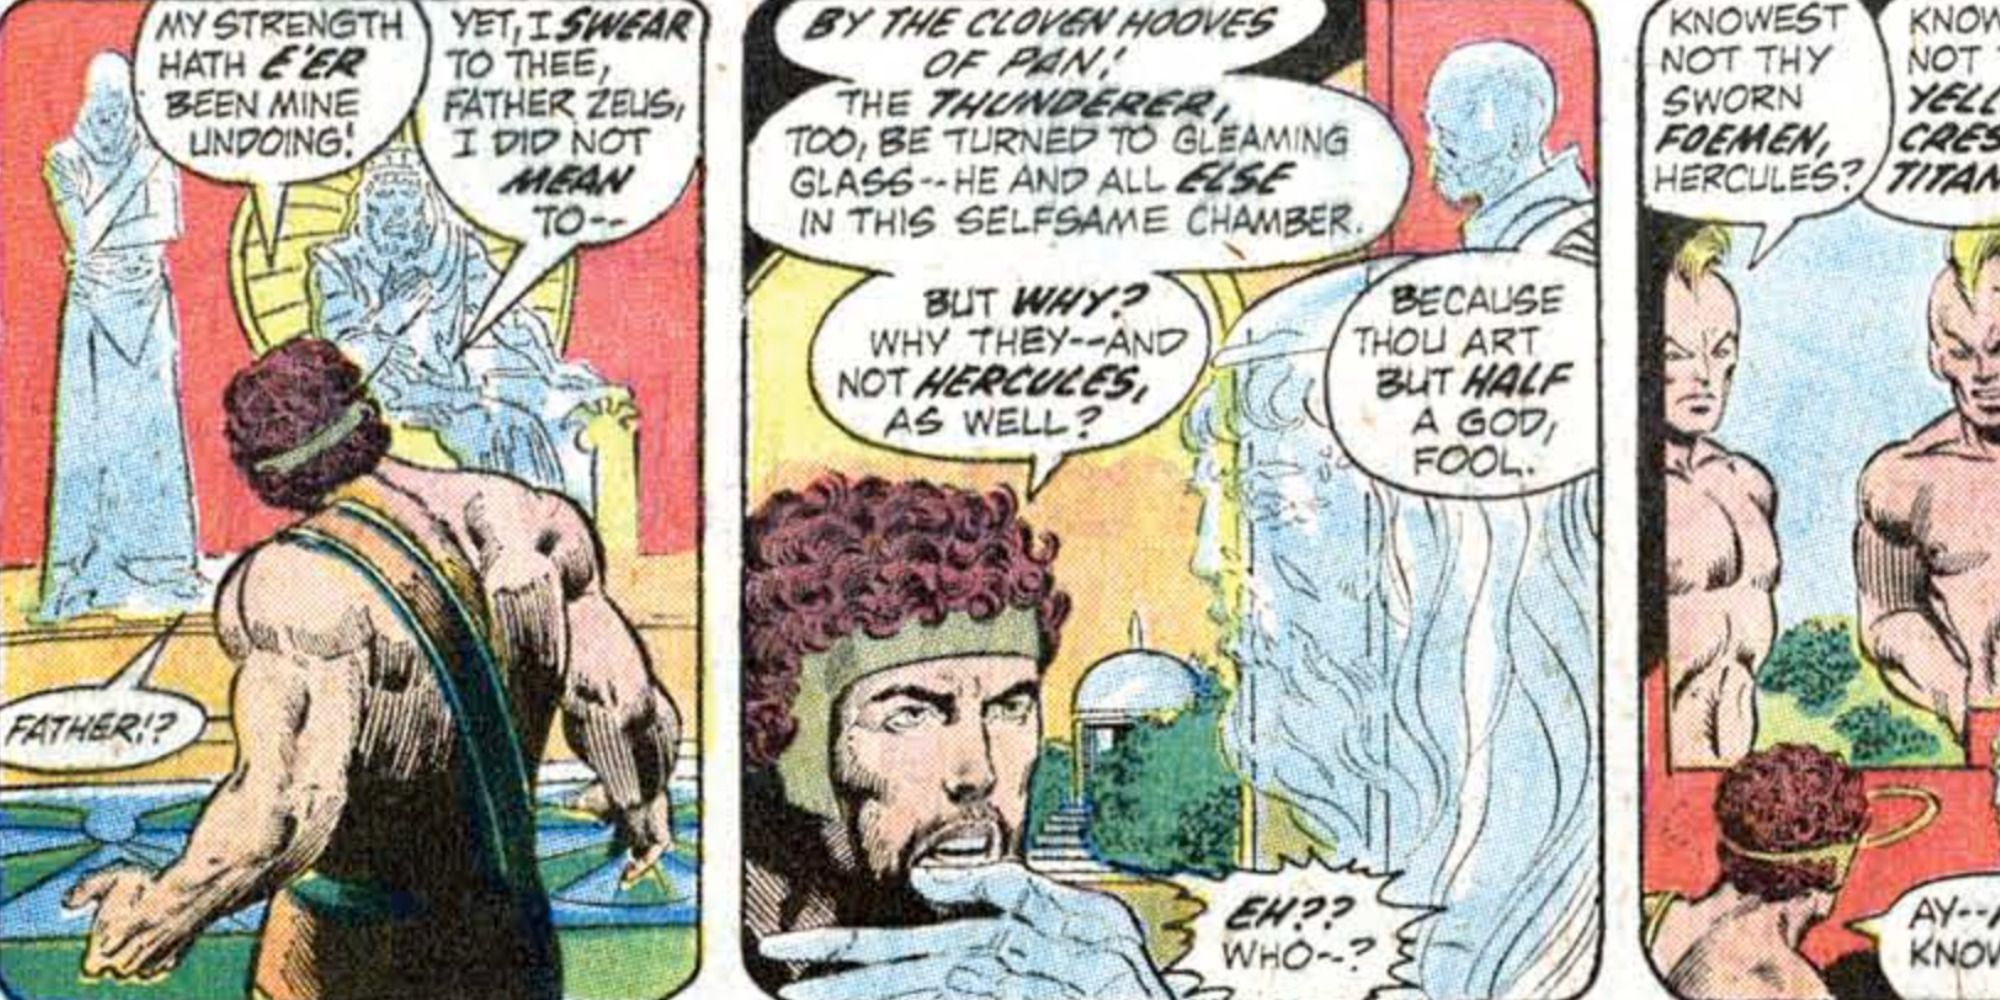 Hercules discovers Zeus has been turned to glass in Marvel Comics.